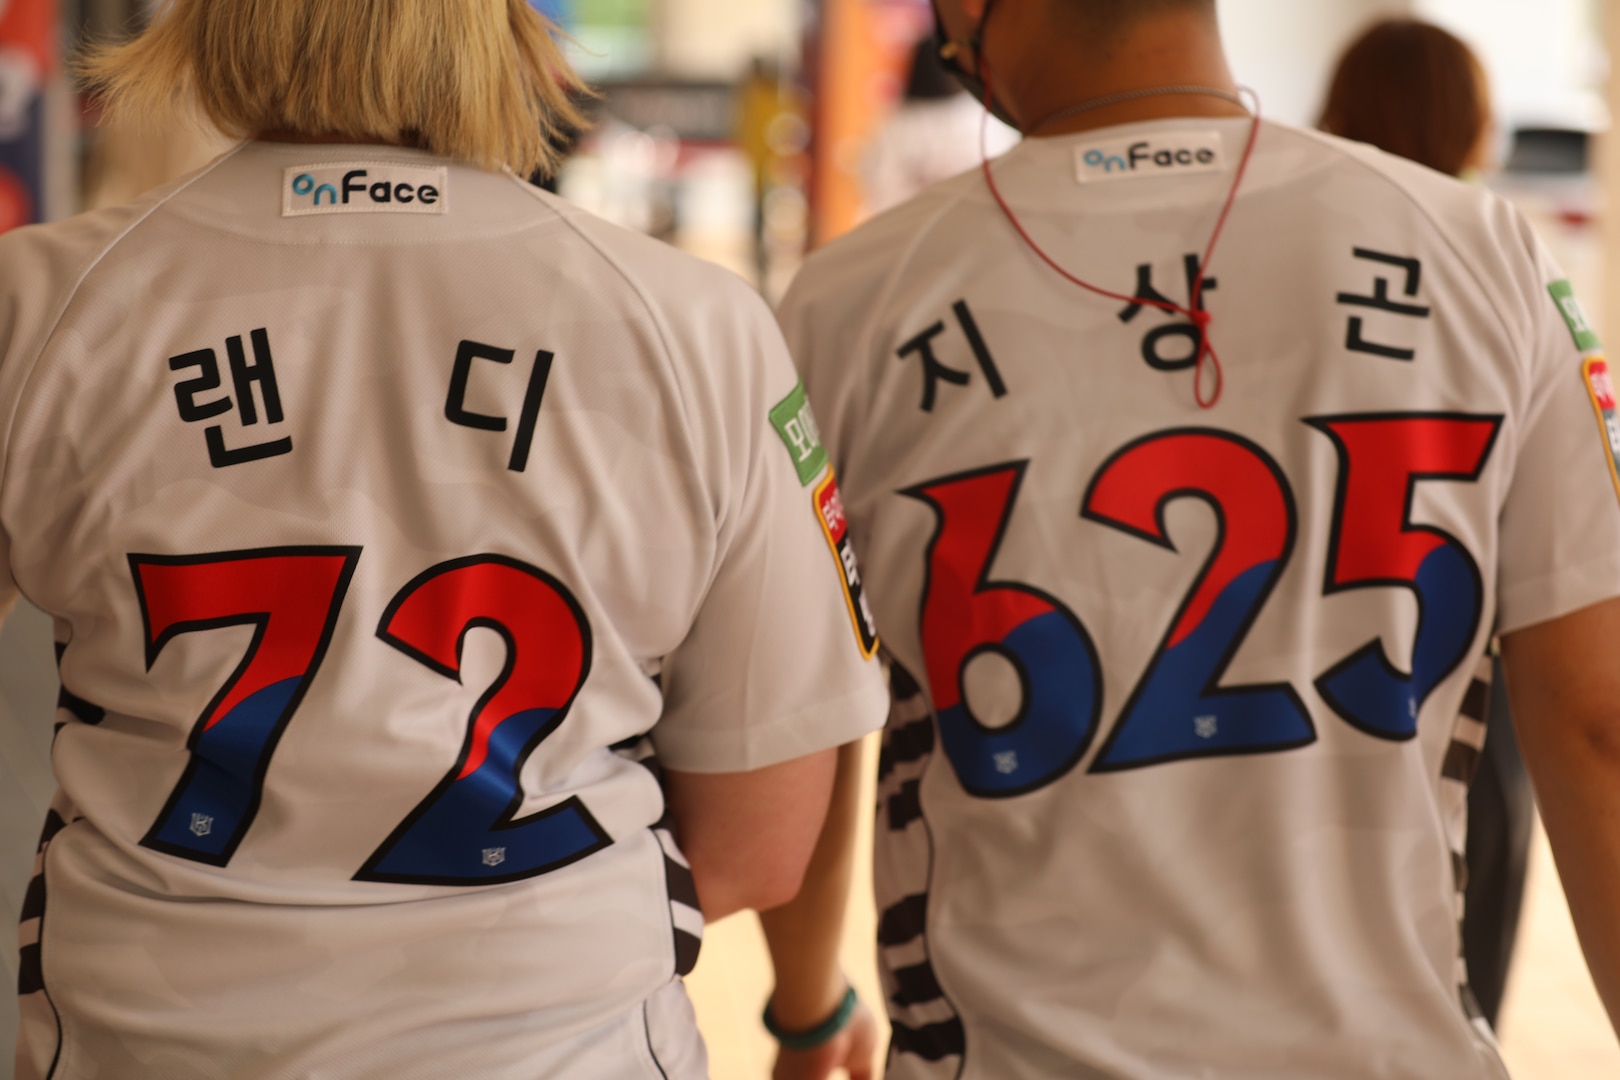 A picture of the back of Lt. Col. Killingsworth's and Capt. (P) Ji's baseball jersey's with the numbers 72 and 625, respectively.